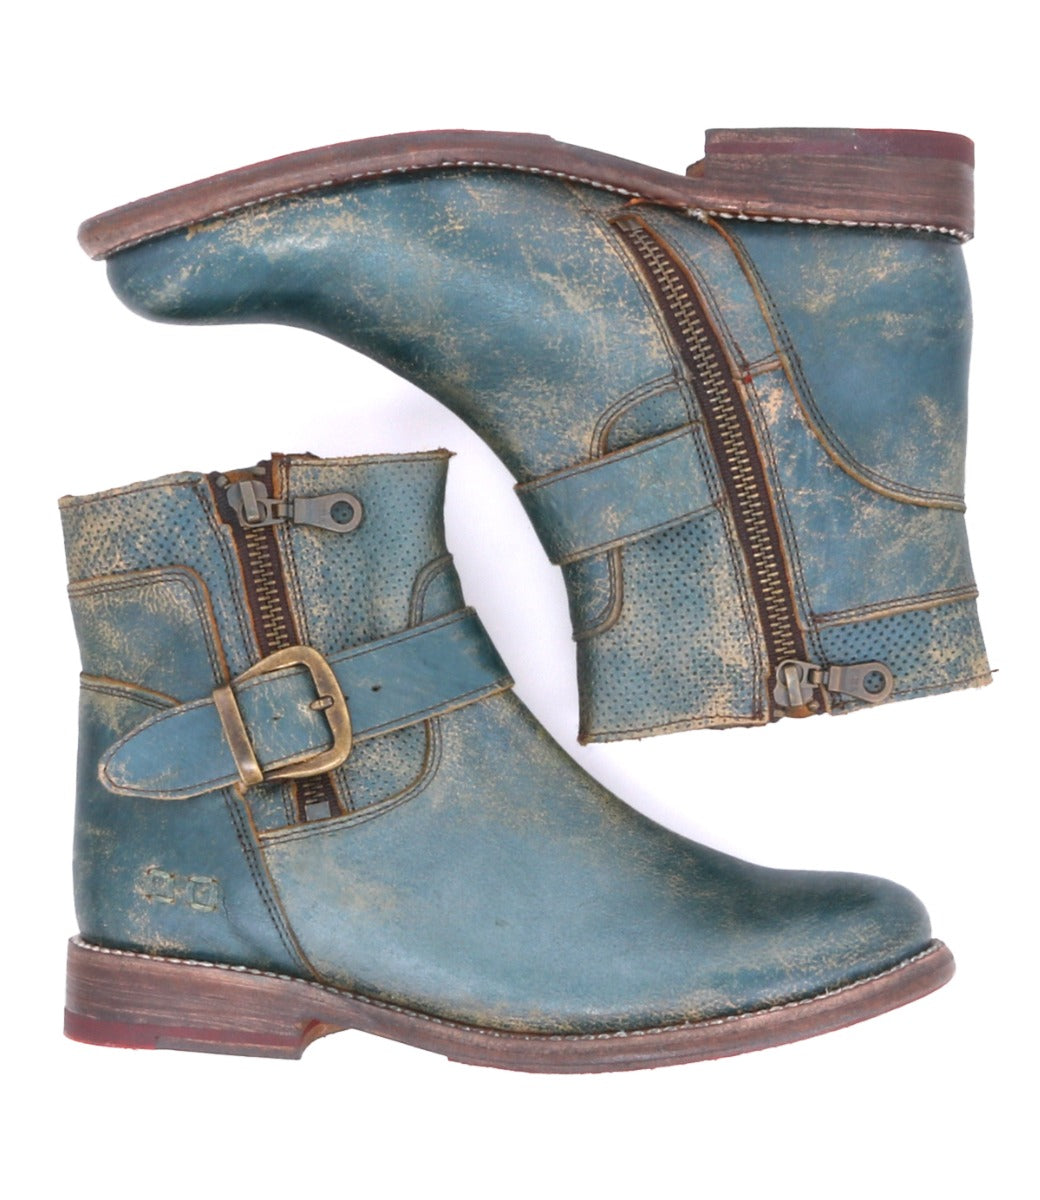 A pair of Becca blue leather boots with buckles by Bed Stu.